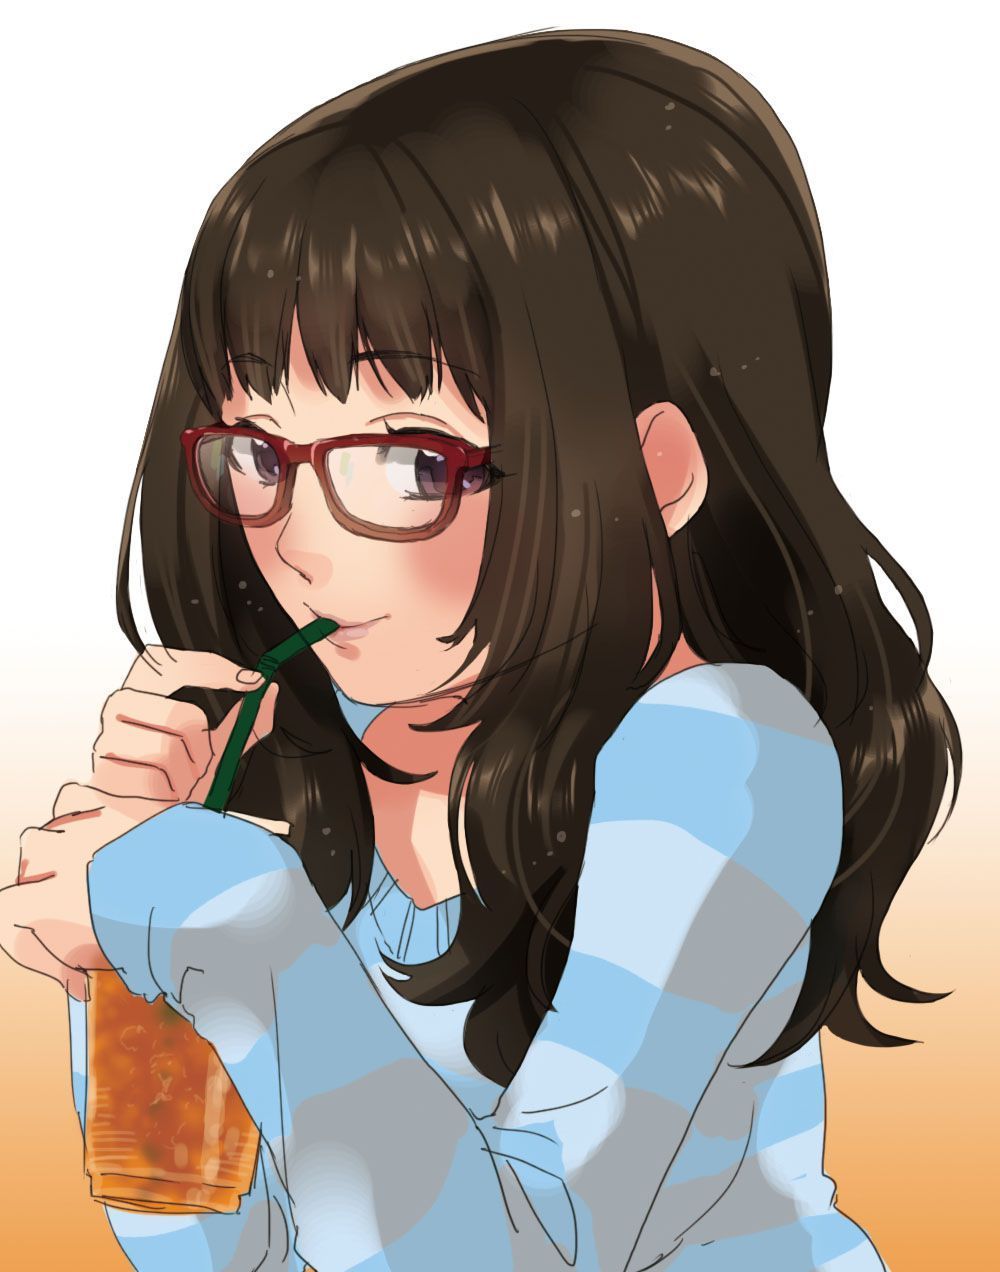 There is a theory that all glasses girls other than the person inside are erotic cute, right? 5